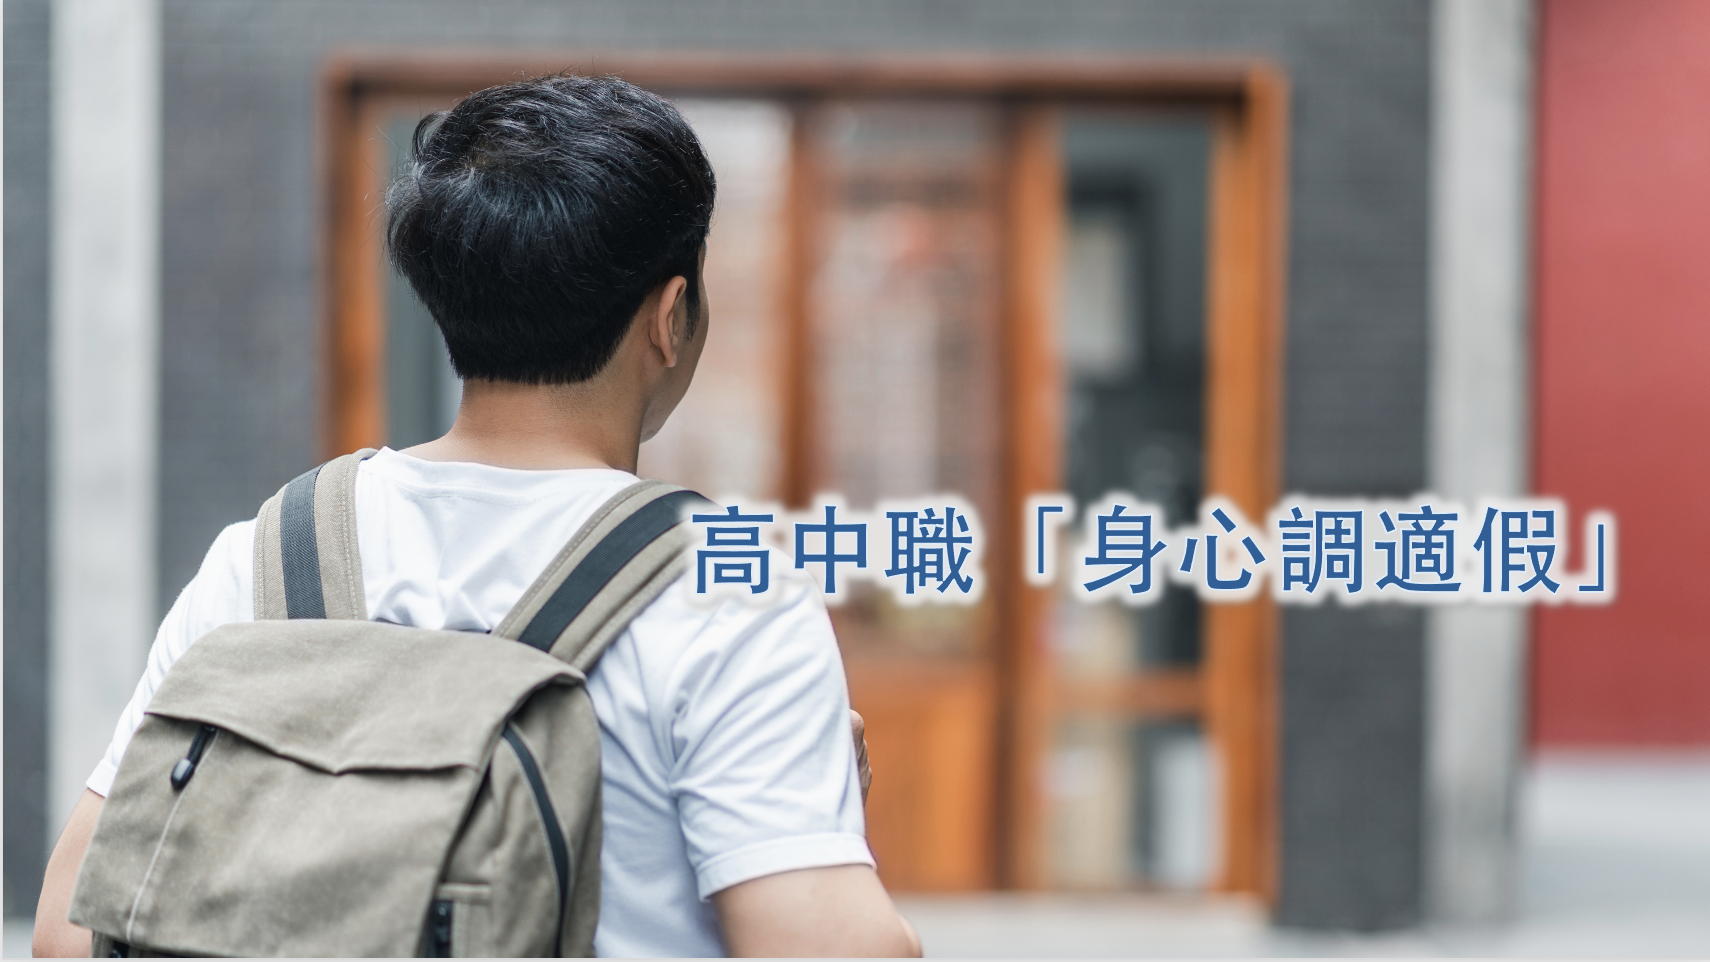 High Schools Introduce "Mental and Physical Adjustment Leave"; 42 Schools Pilot Program, Parent Groups Urge Ministry of Education (Taiwan) to Enhance Support Measures